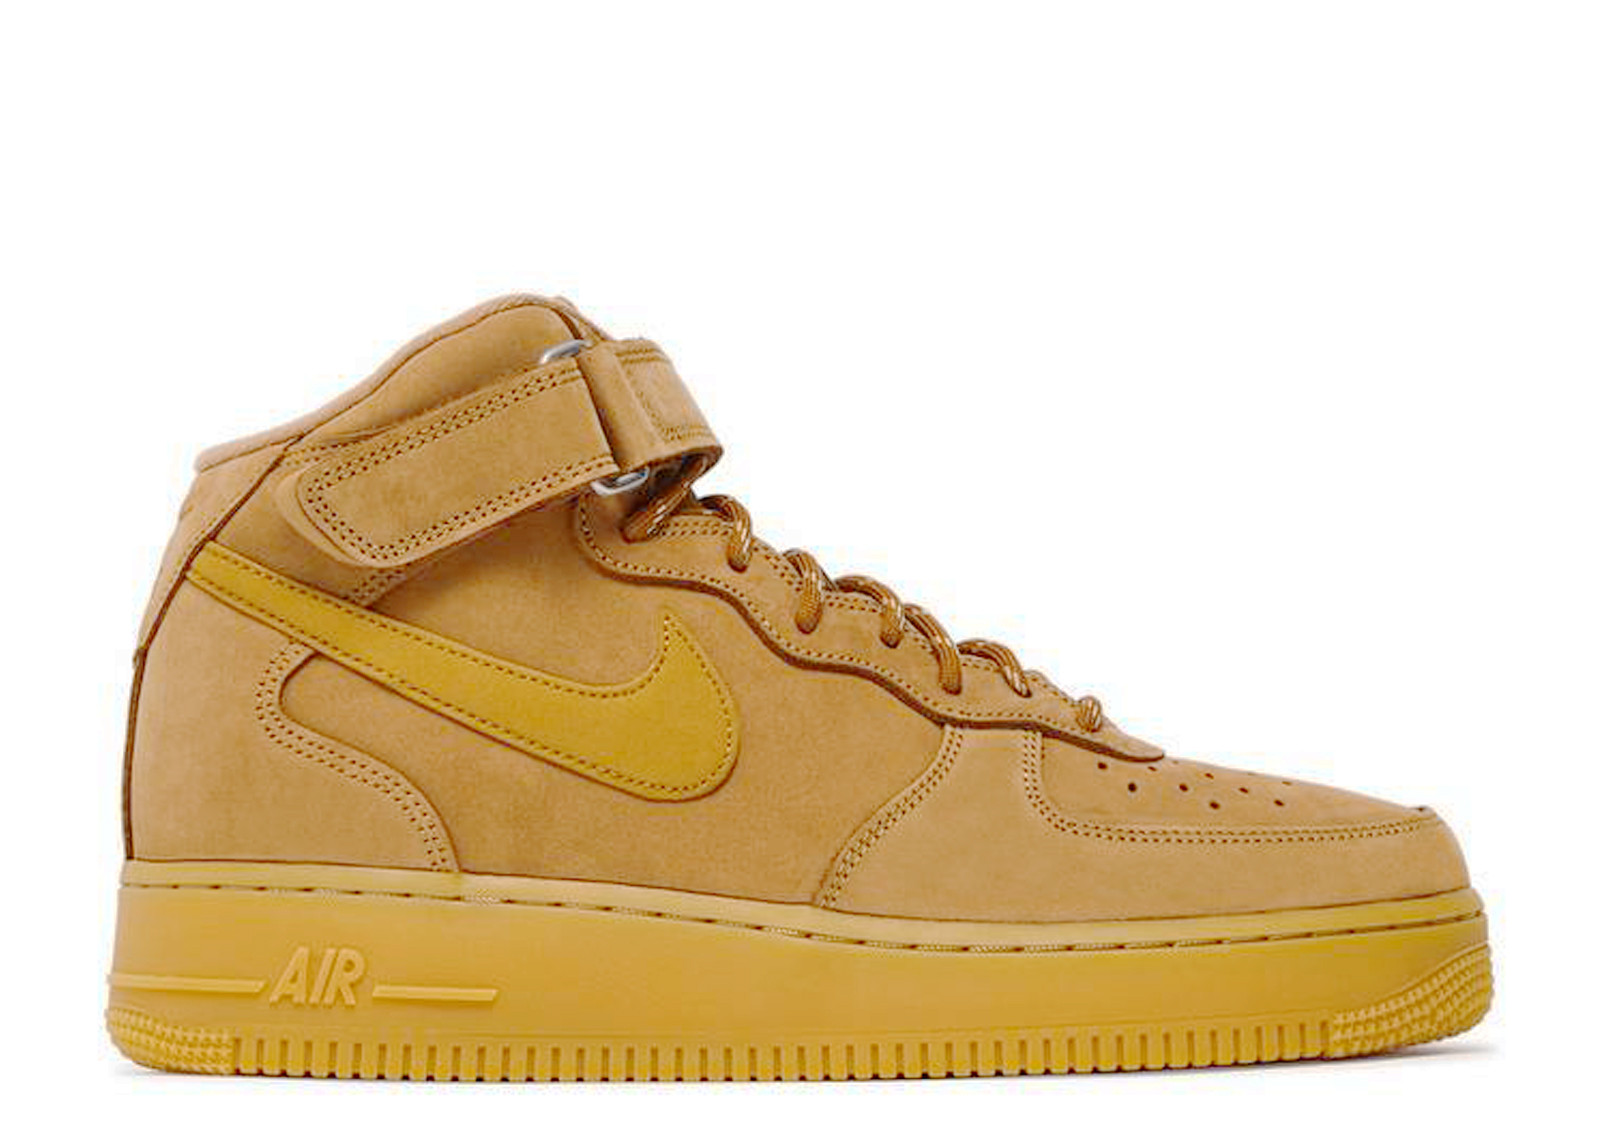 AIR FORCE 1 MID FLAX image 1